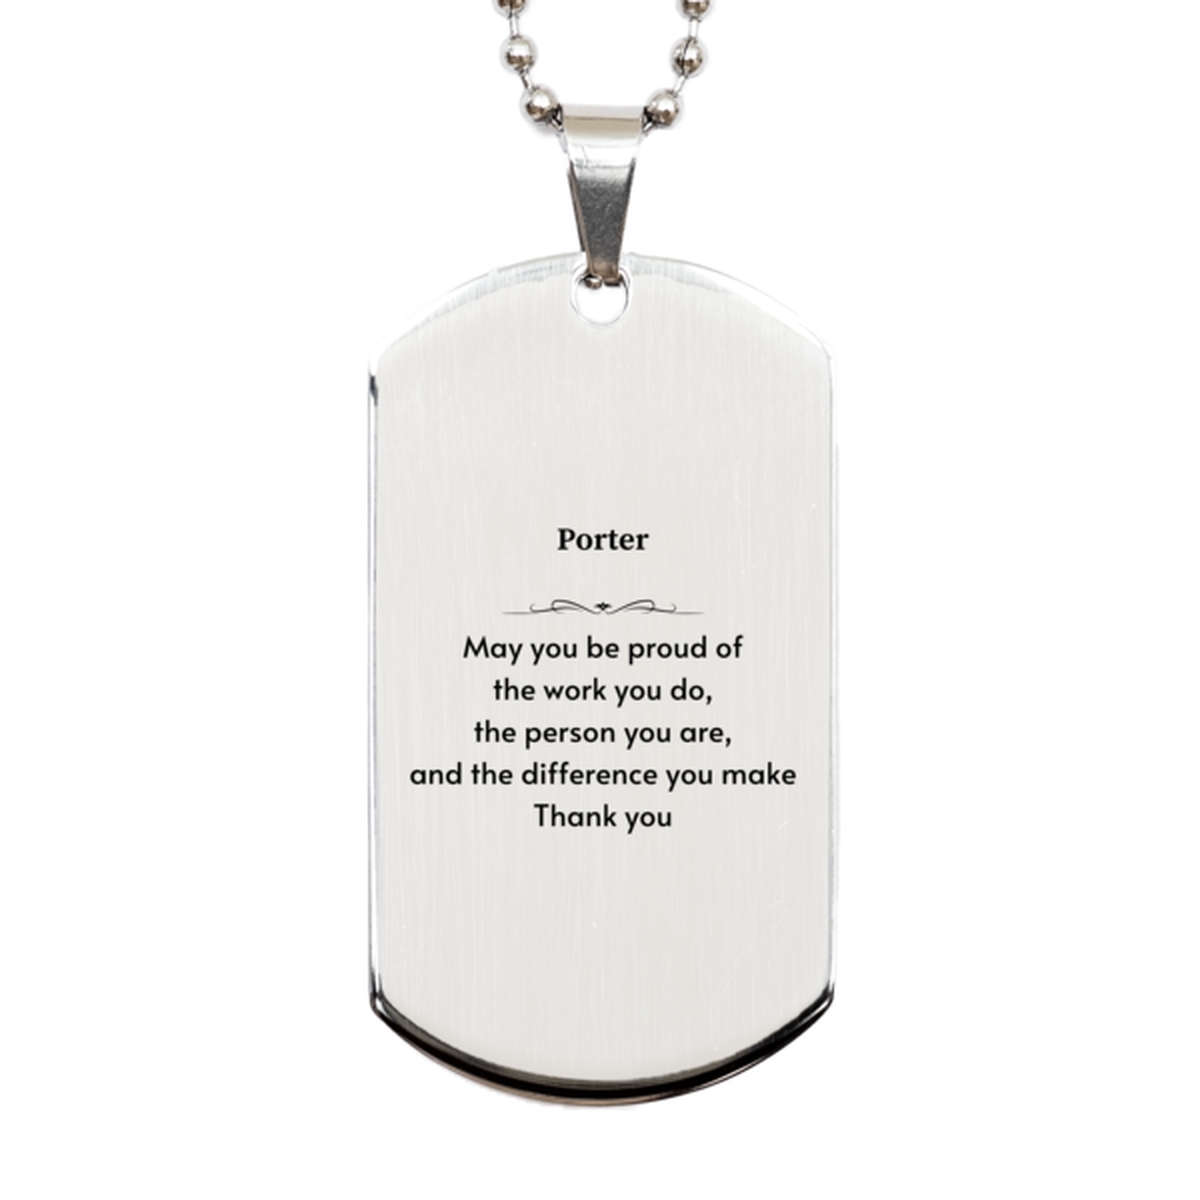 Heartwarming Silver Dog Tag Retirement Coworkers Gifts for Porter, Porter May You be proud of the work you do, the person you are Gifts for Boss Men Women Friends